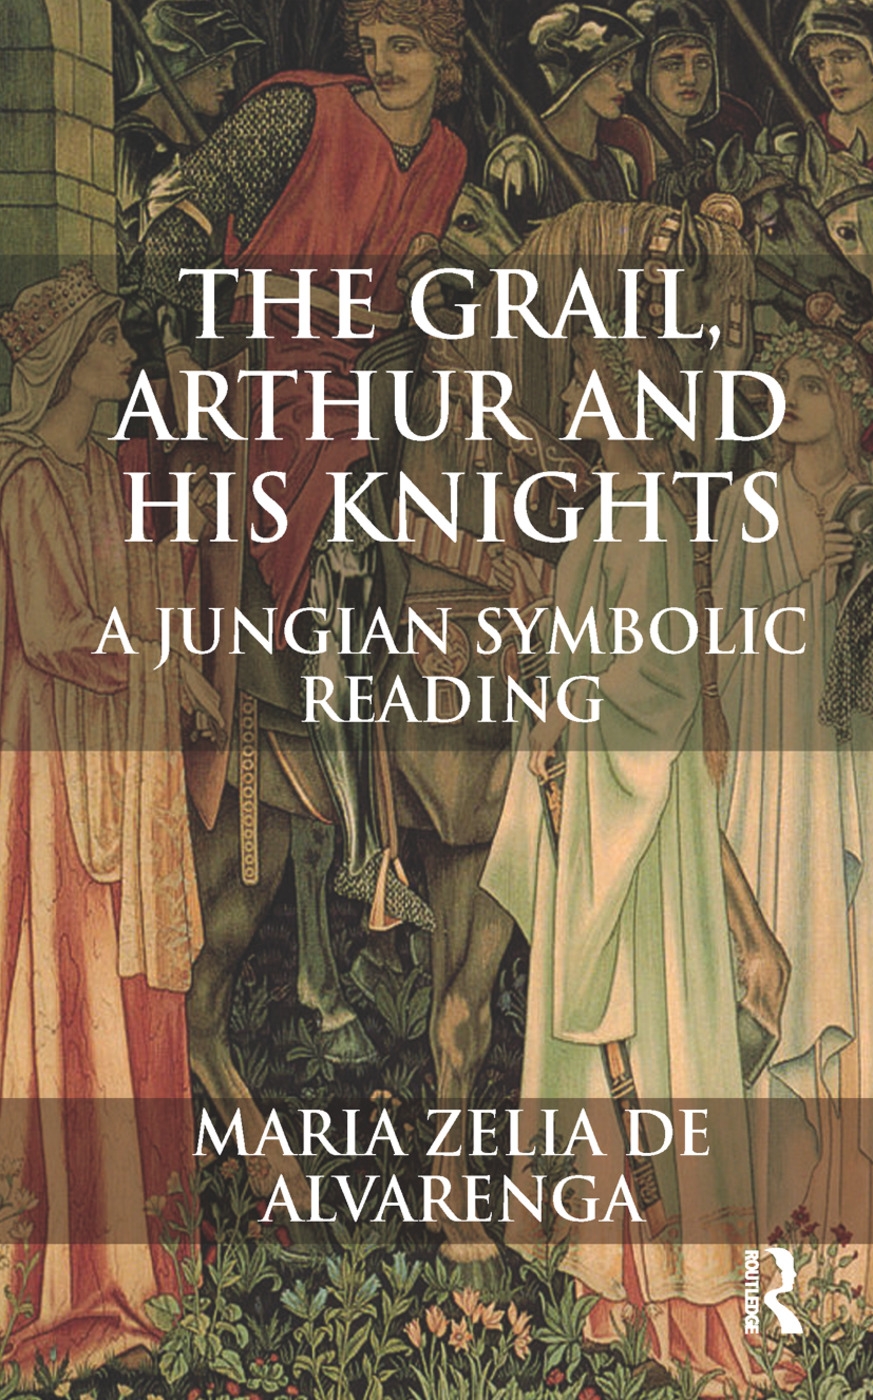 The Grail, Arthur and His Knights: A Symbolic Jungian Reading